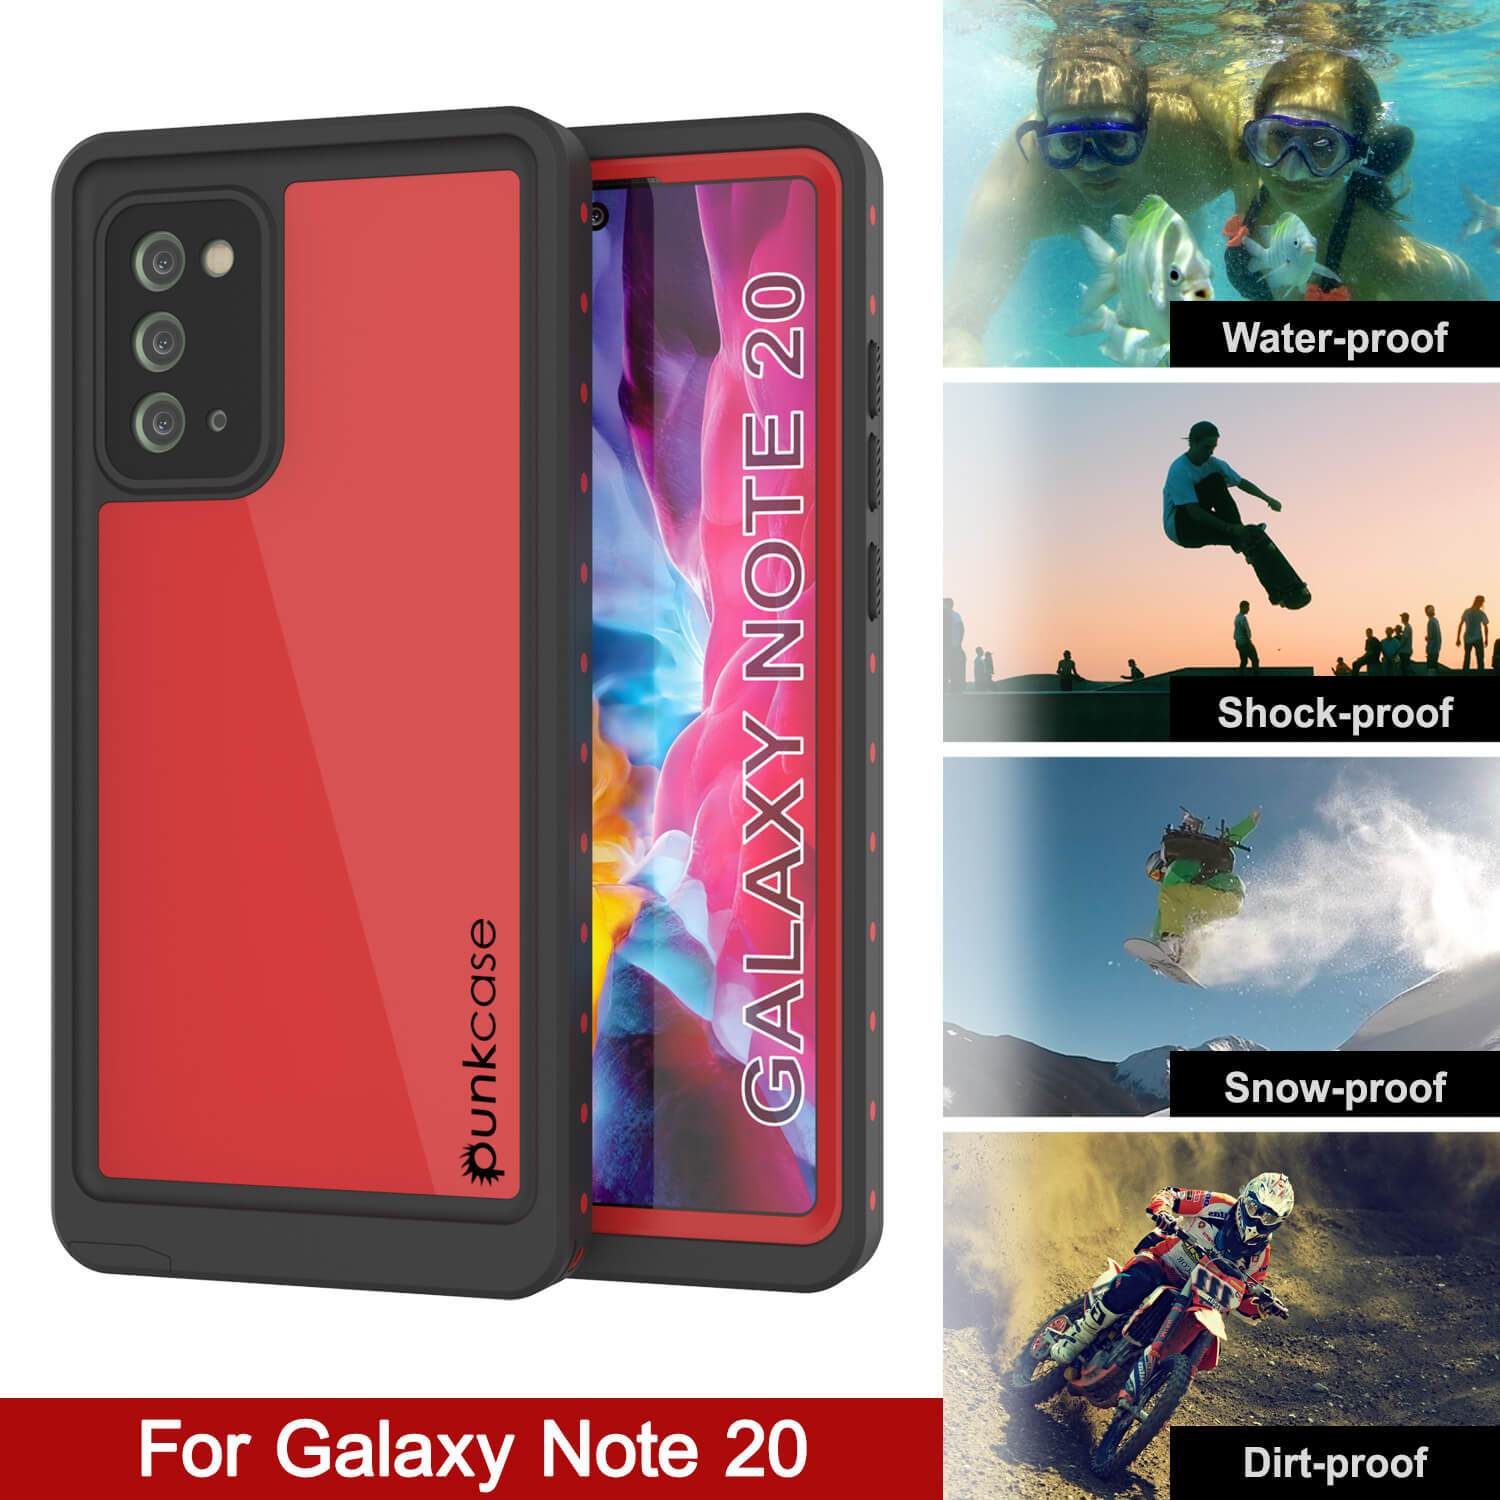 Galaxy Note 20 Waterproof Case, Punkcase Studstar Red Series Thin Armor Cover